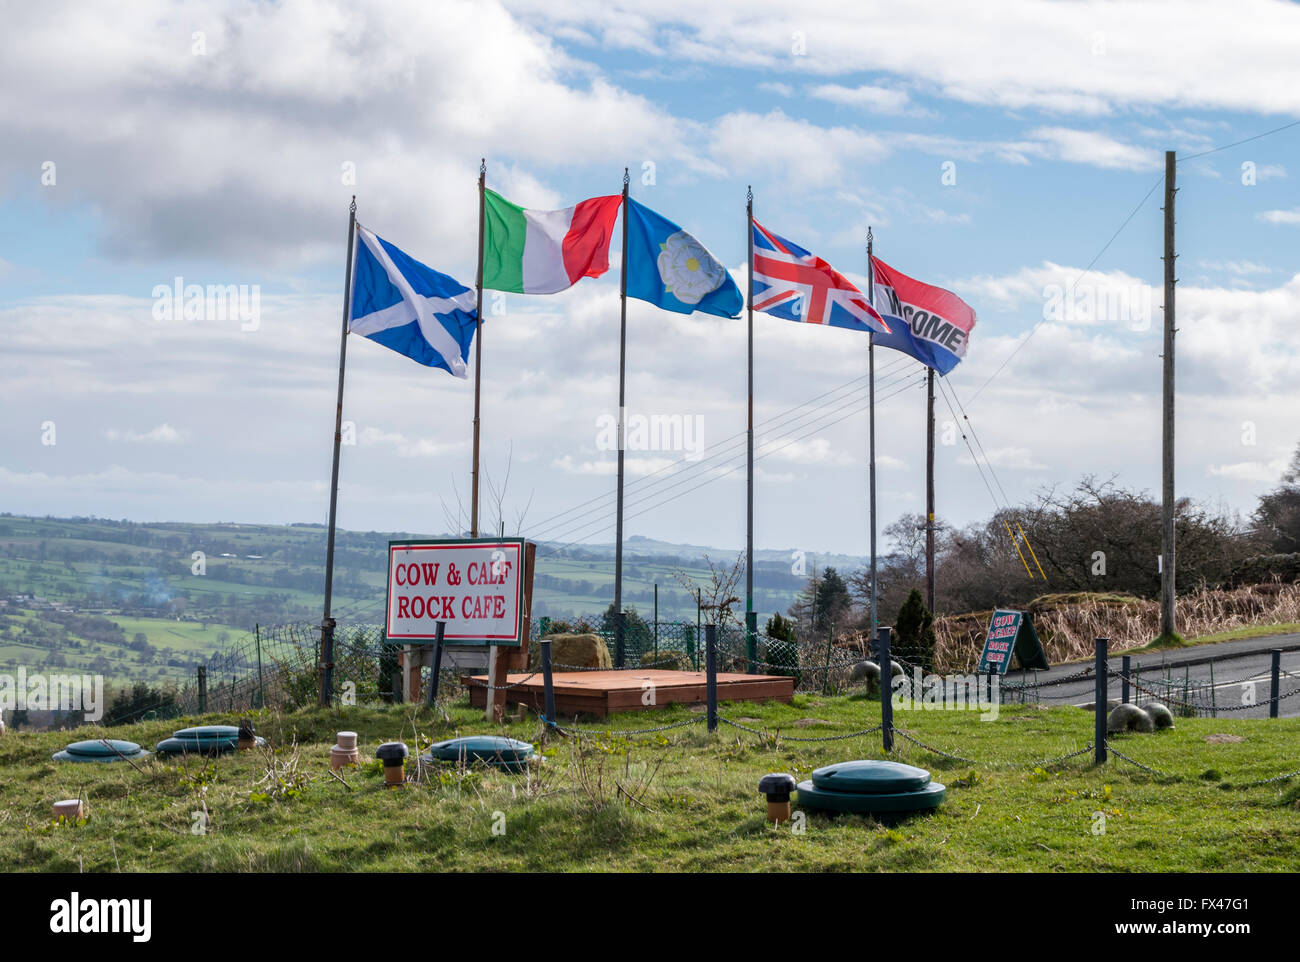 Country flags near the entrance of the Cow and Calf Rock Cafe and car park, Ilkley Moor, West Yorkshire, UK. Stock Photo